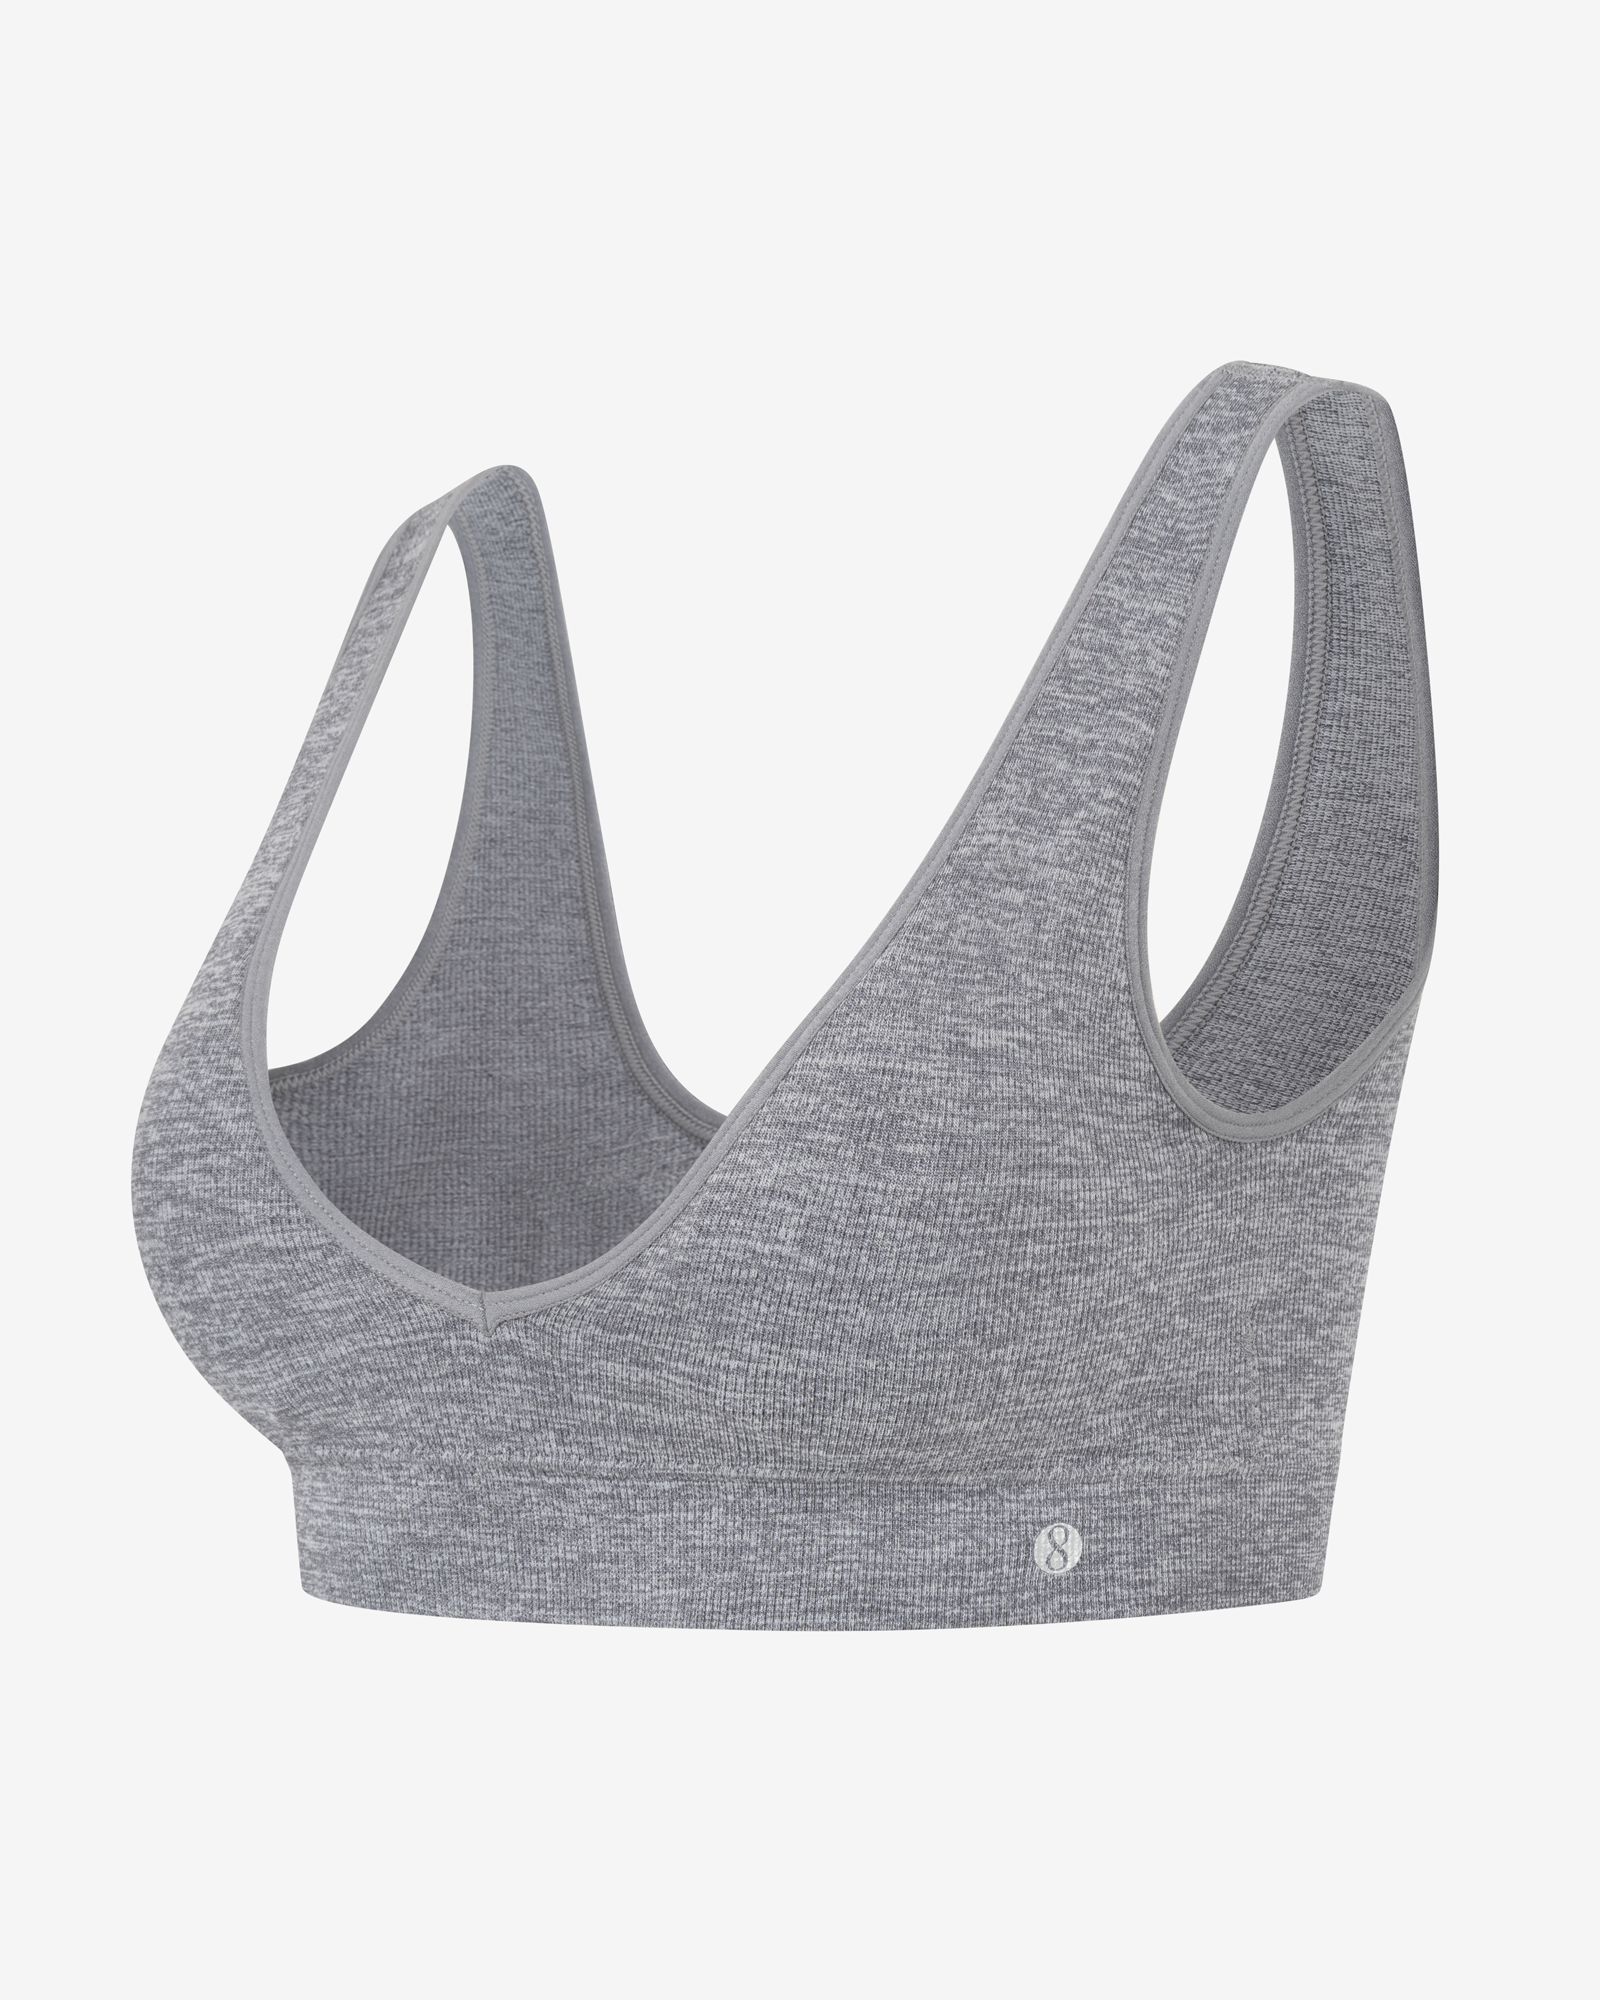 LAYER 8 MAXIMUM SUPPORT SIZE M Sports Bra HEATHER GRAY Fitted Front  Zipper-NEW